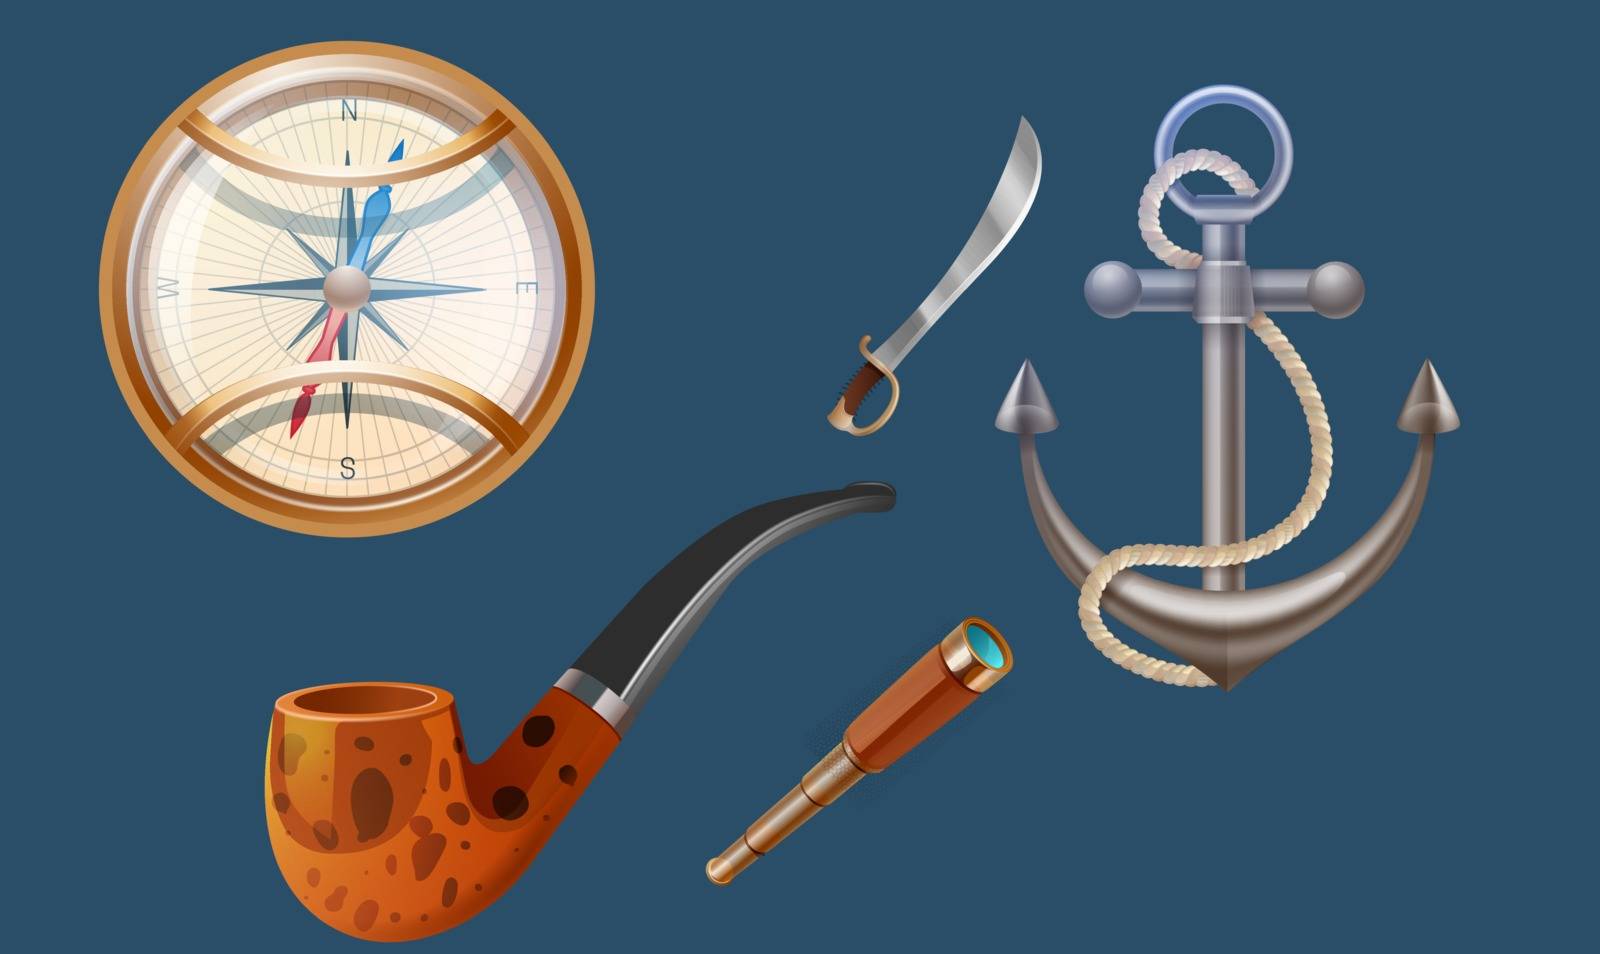 mock up illustration of treasure hunt game equipment on abstract backgrounds